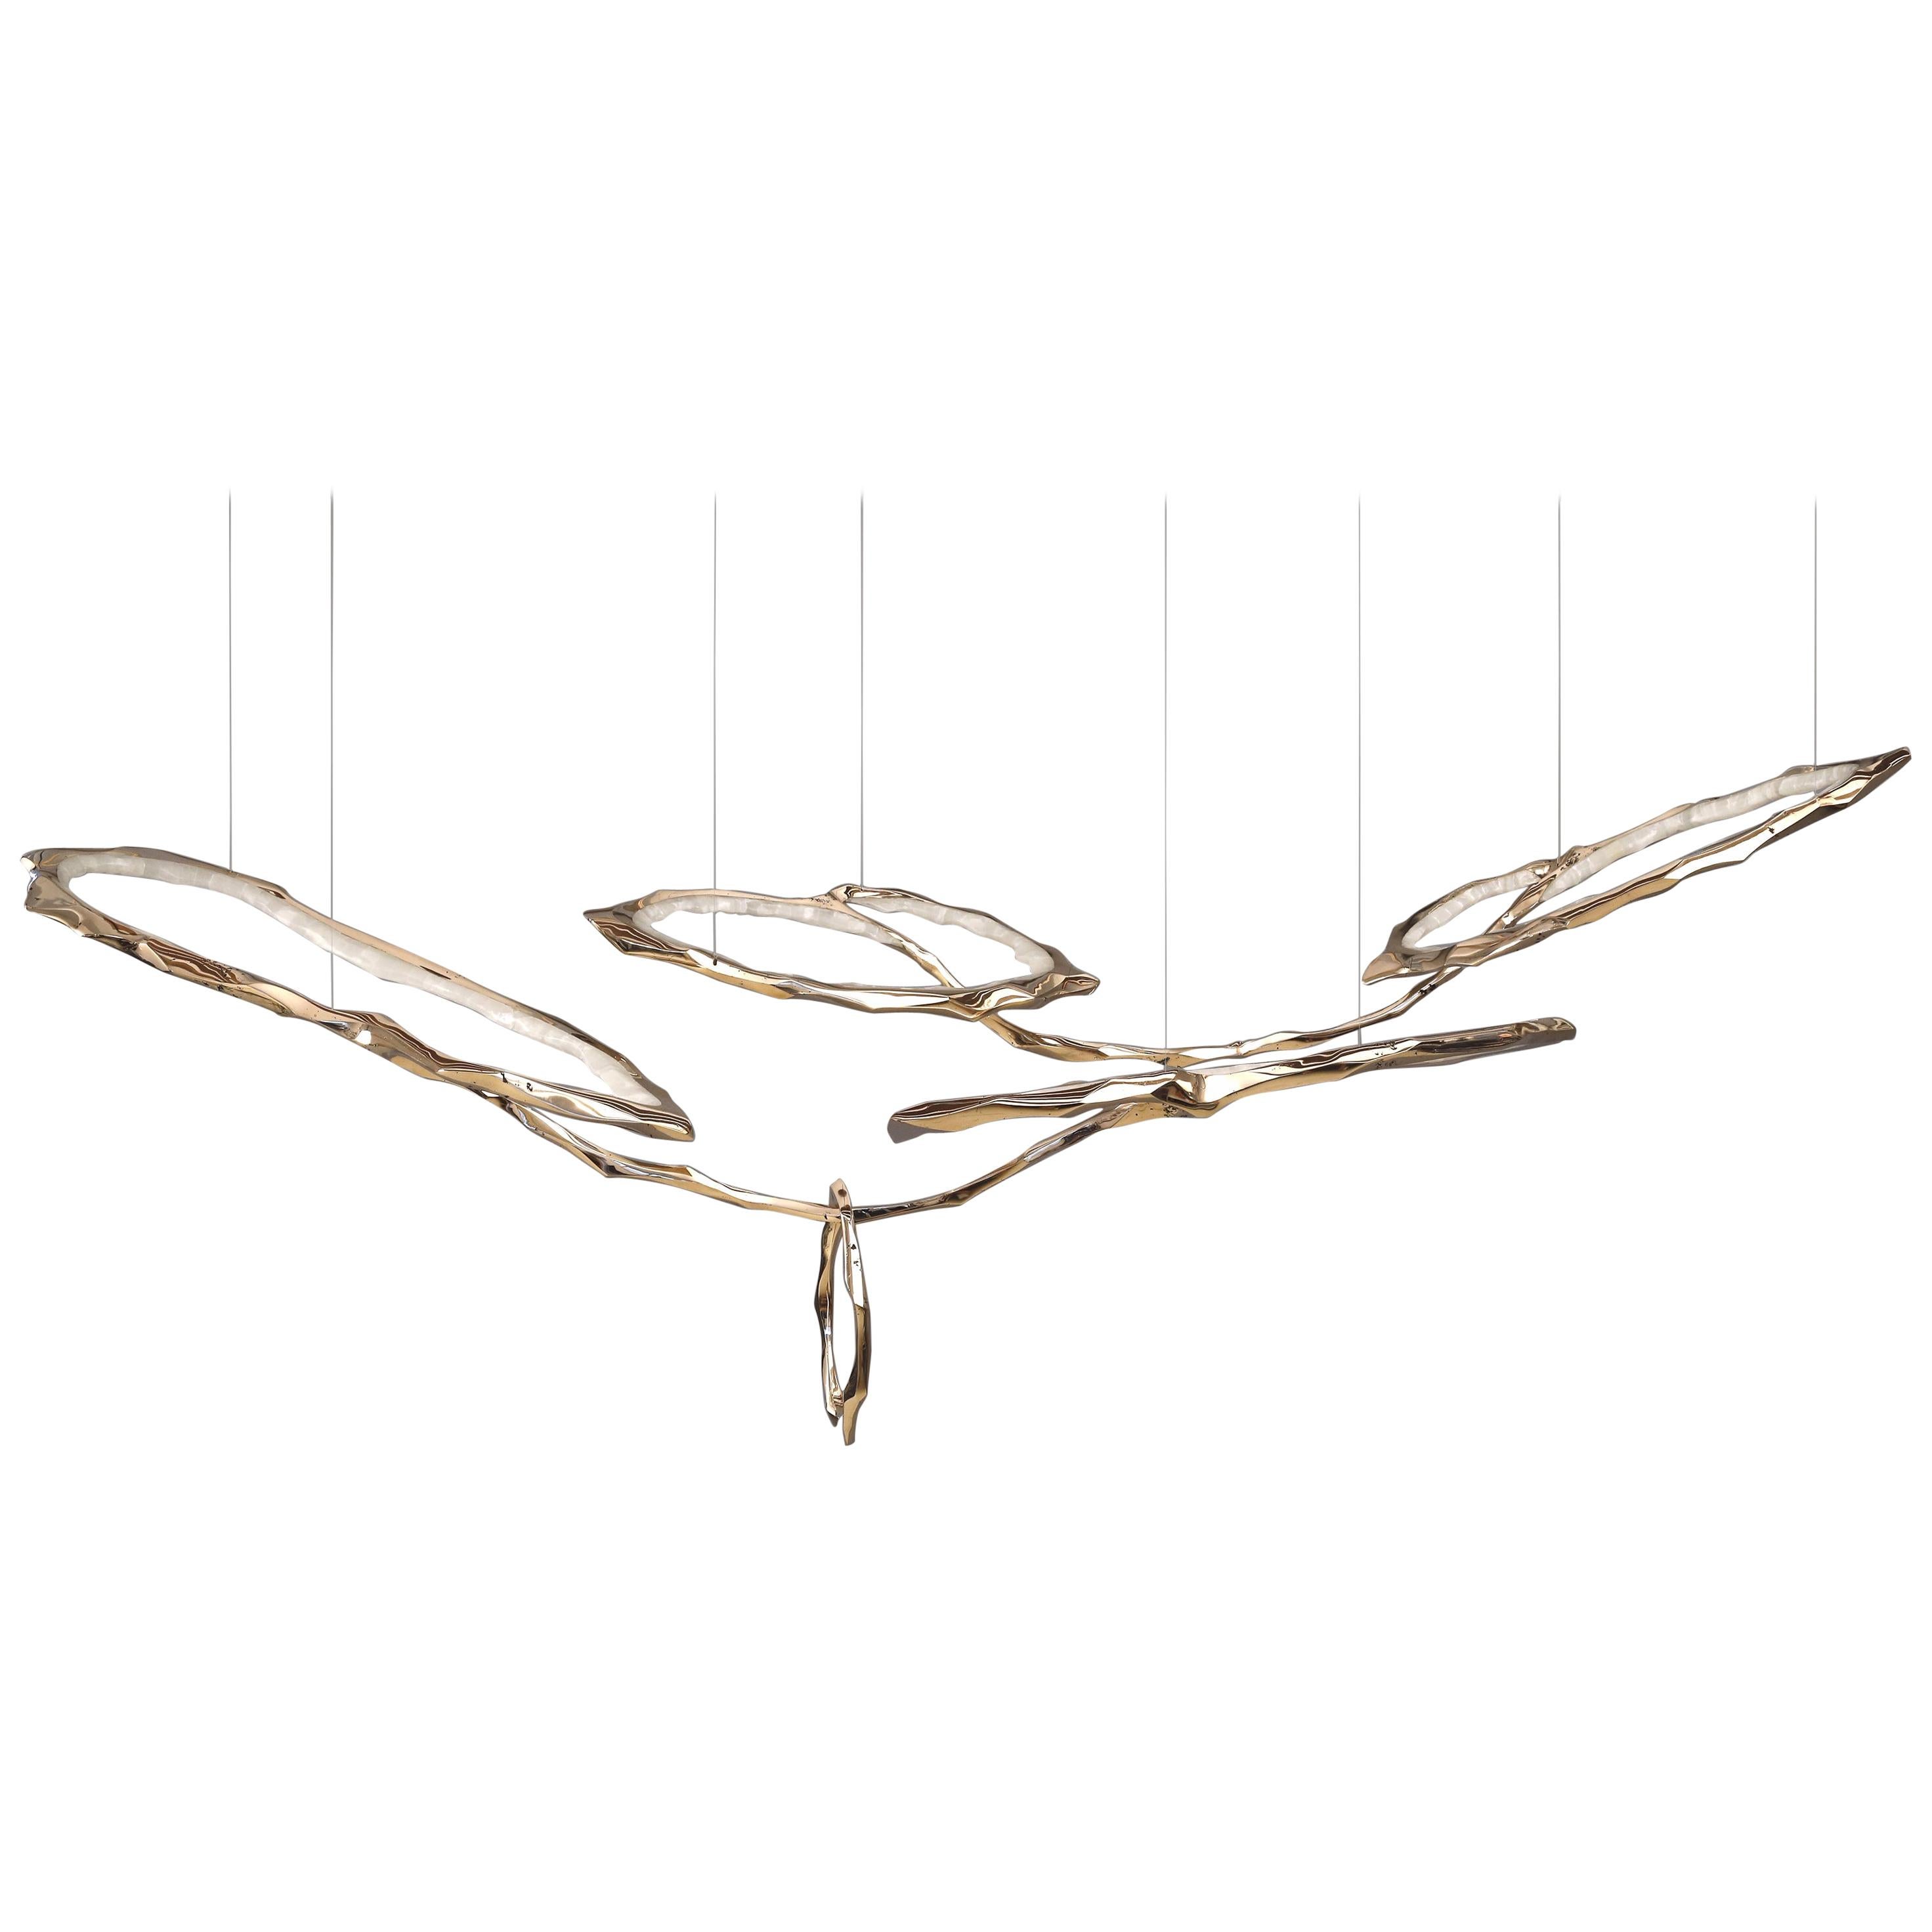 Bronze and Onyx Cloud Chandelier No. 1, USA